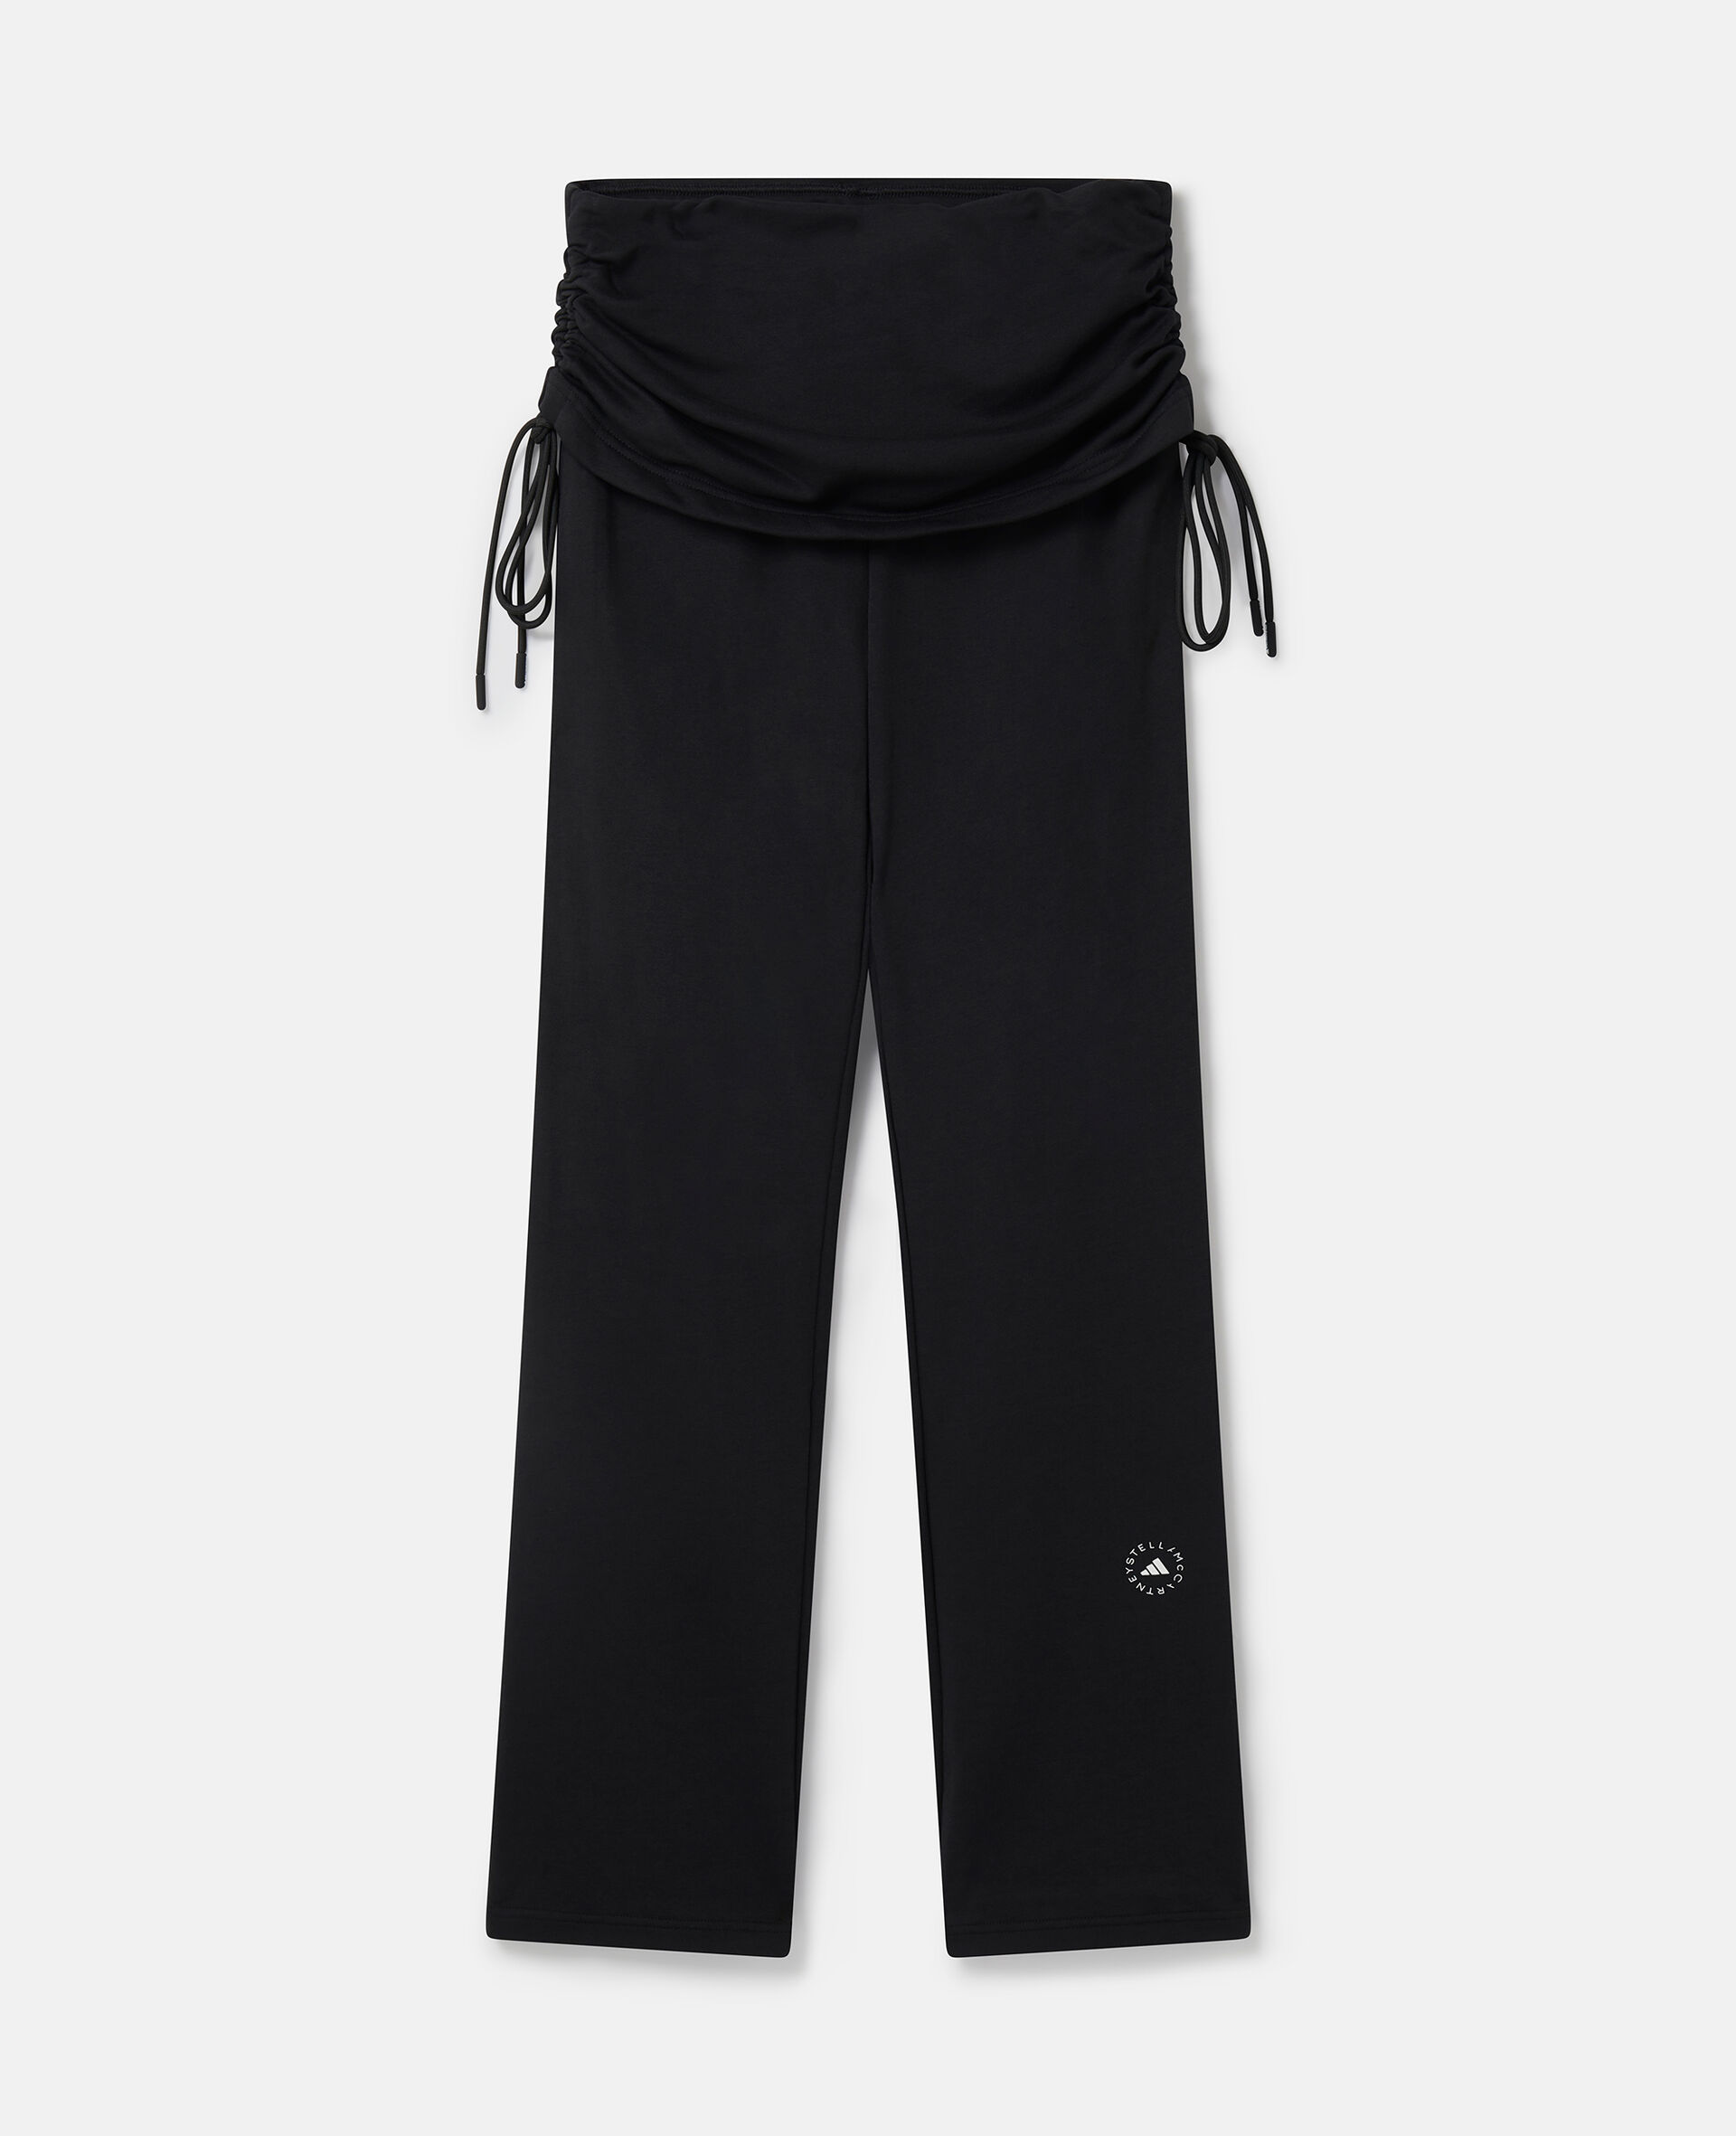 TrueCasuals Rolltop Trousers-Black-large image number 0